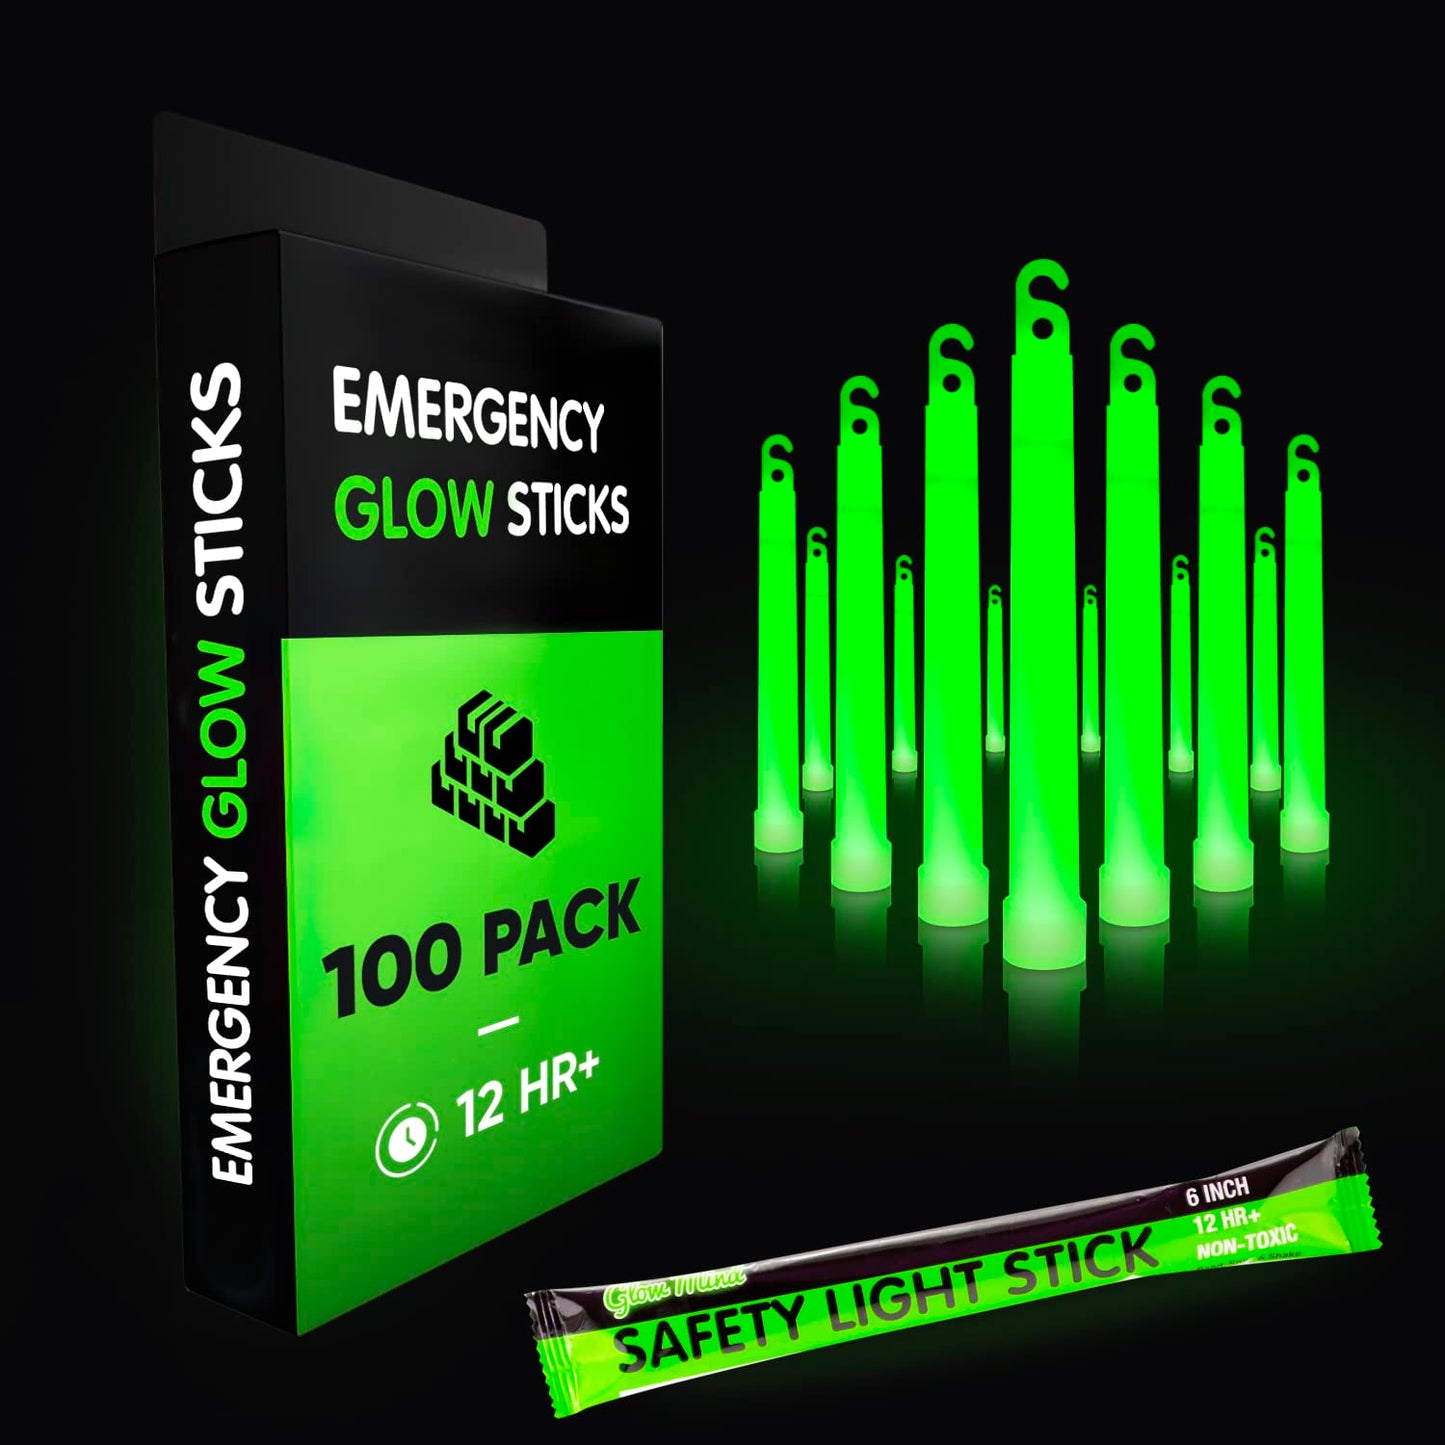 Green Emergency Glow Sticks - Ultra Bright Long Lasting Industrial Grade Glowsticks for Survival Gear, Camping Lights, Power Outages and Military